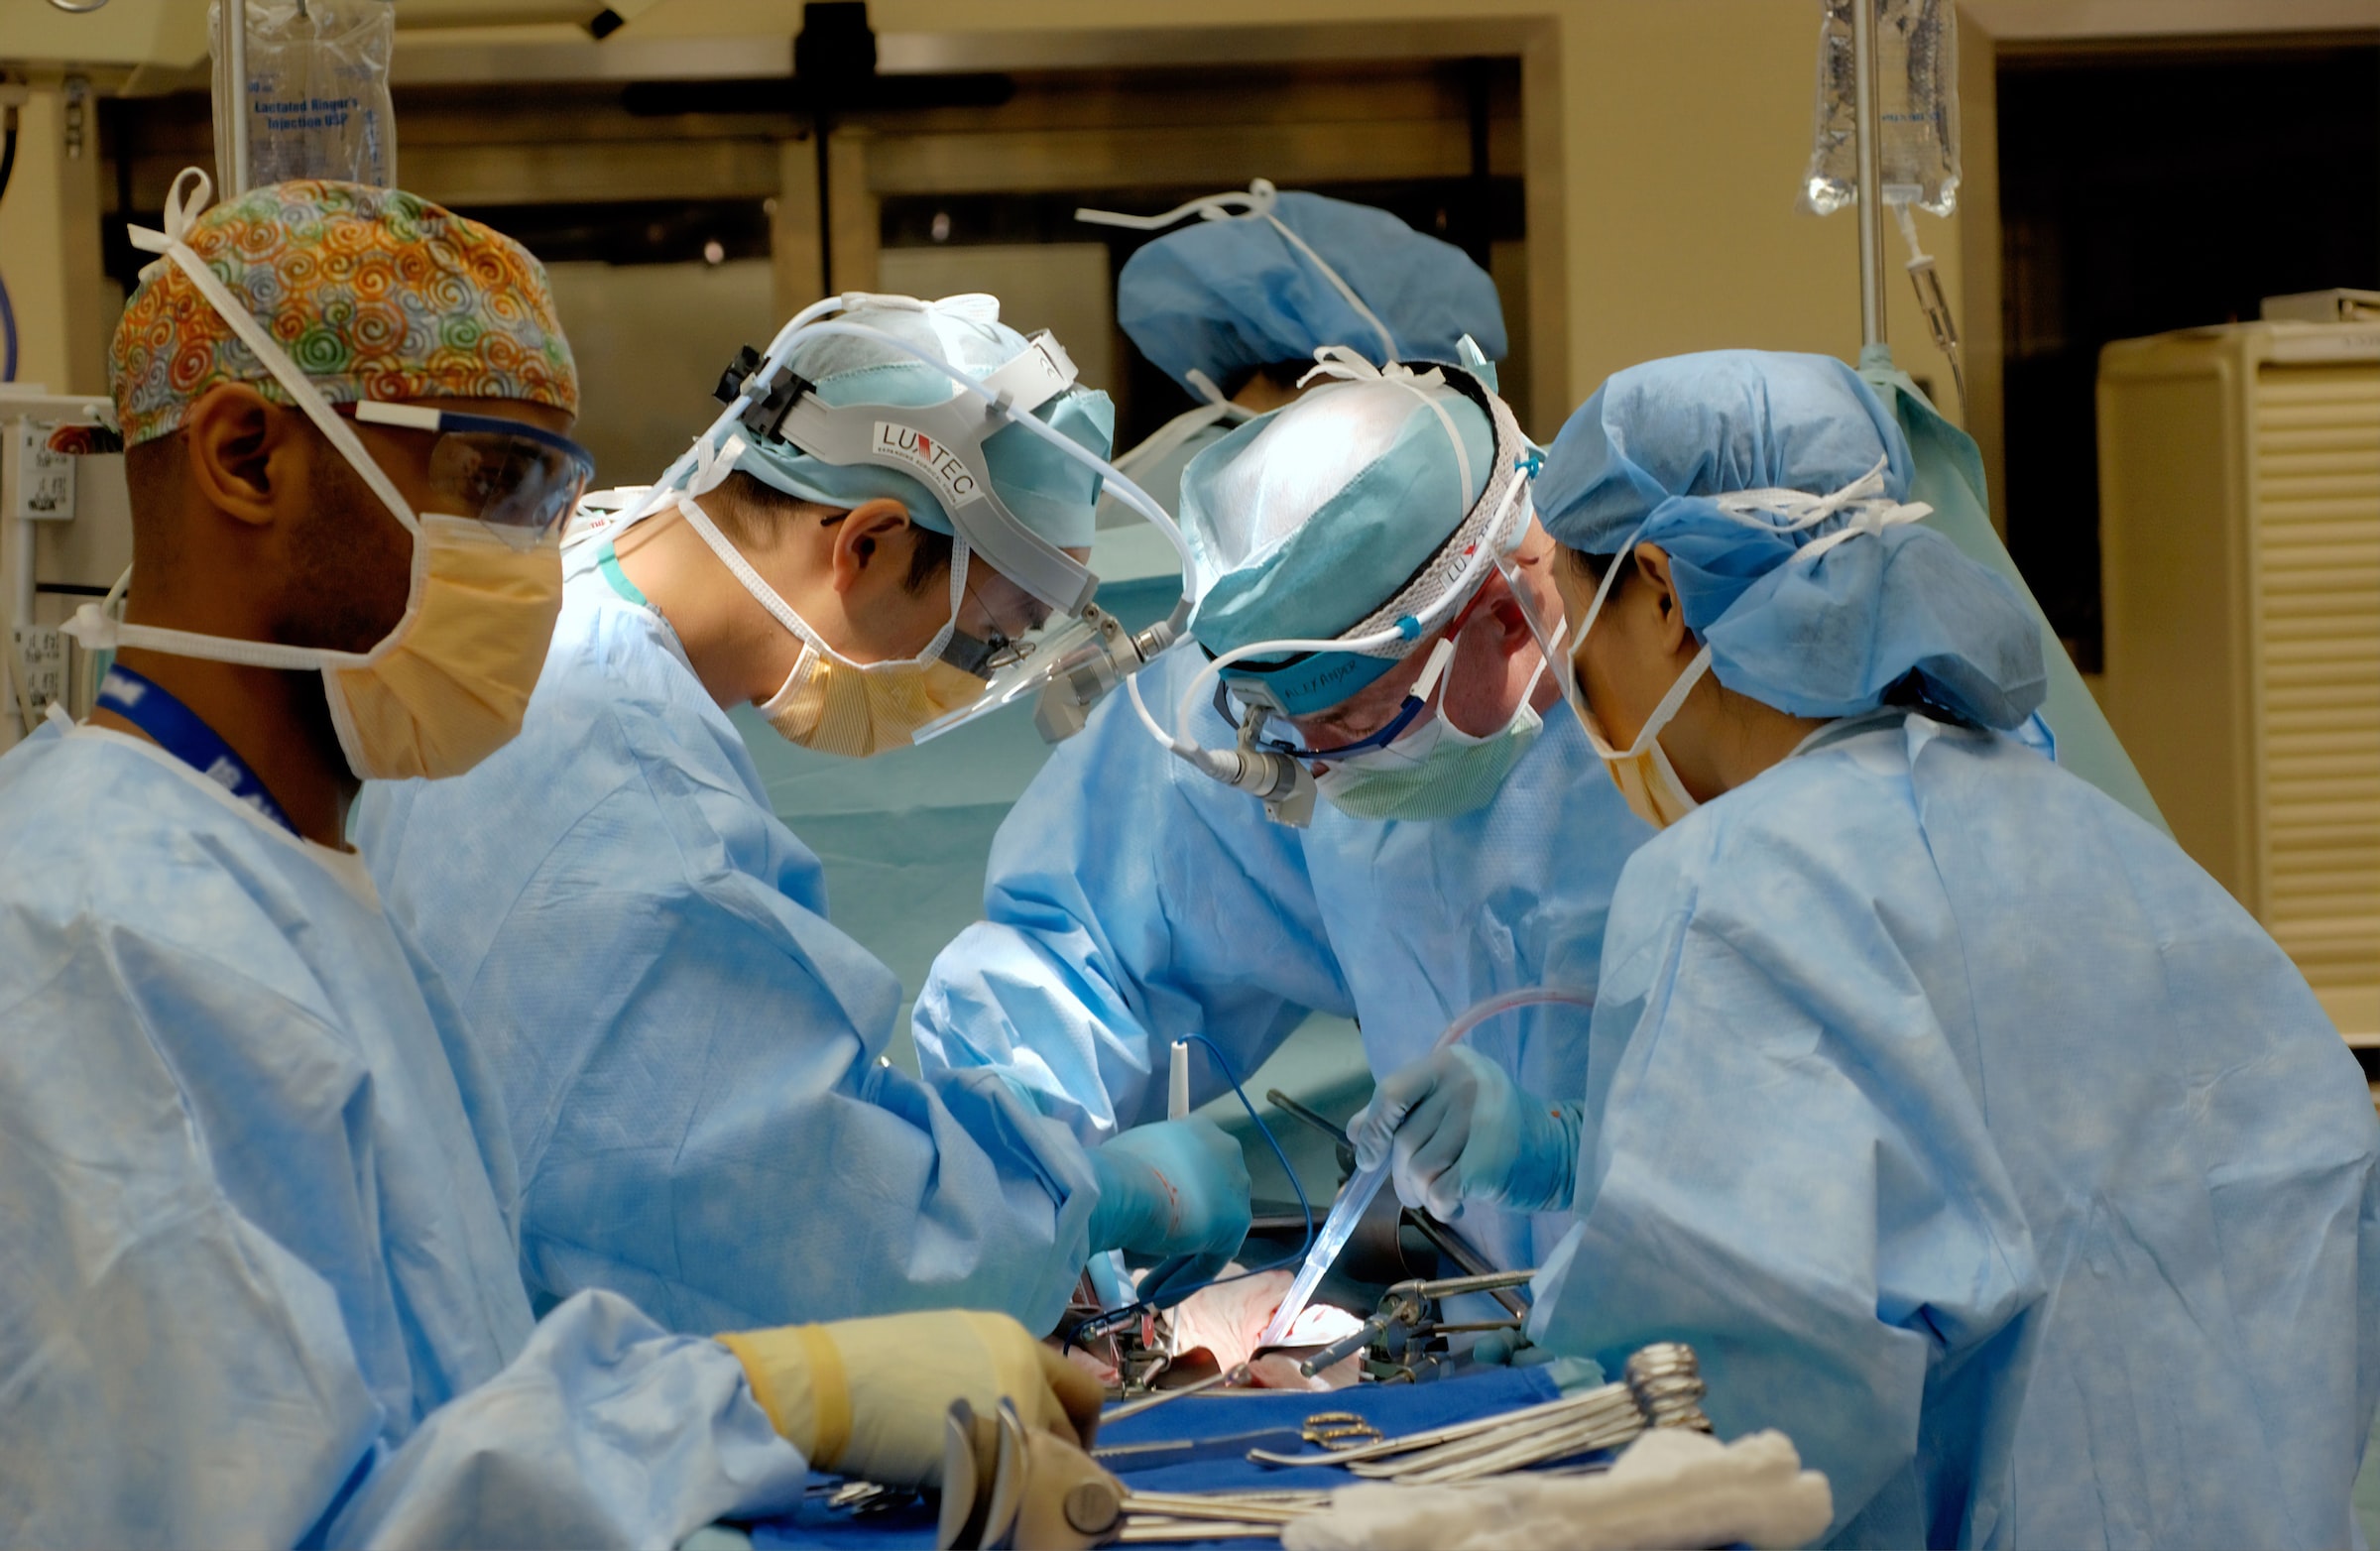 A team of surgeons in operating theatre wearing blue gowns, skull caps and face masks